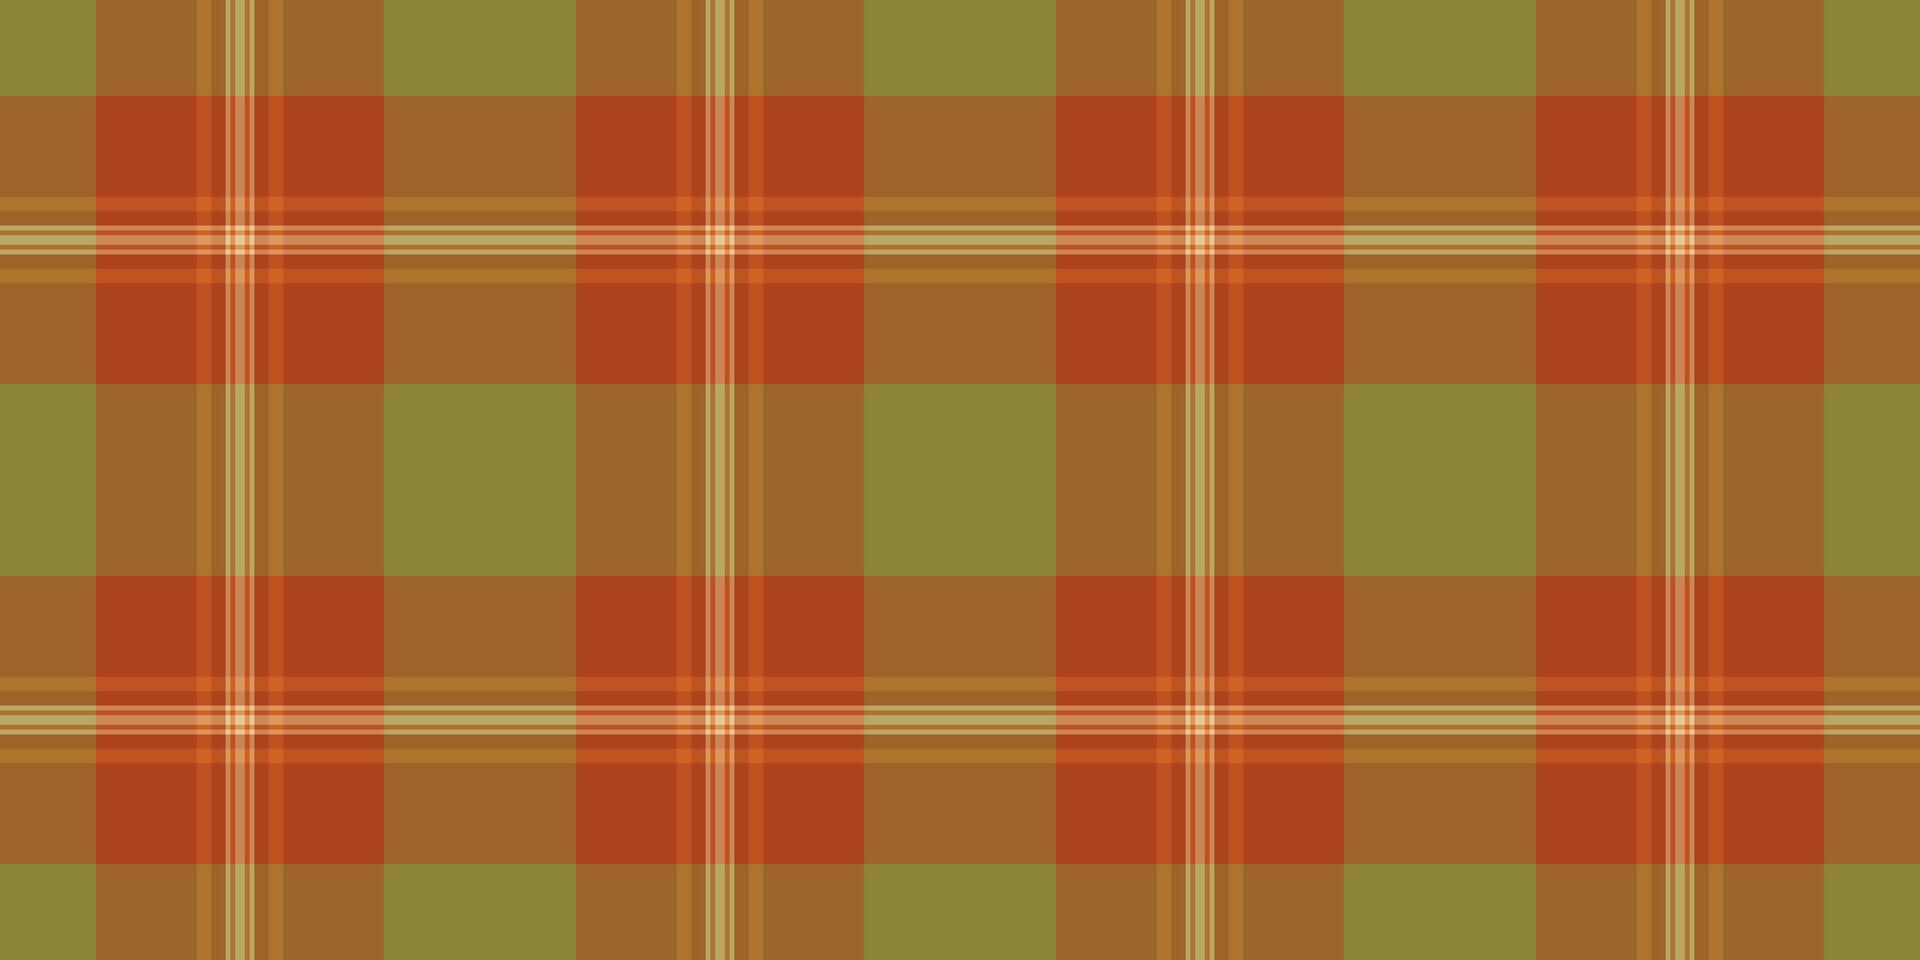 Group seamless pattern check, carnival texture background plaid. Choice vector fabric tartan textile in orange and yellow colors.